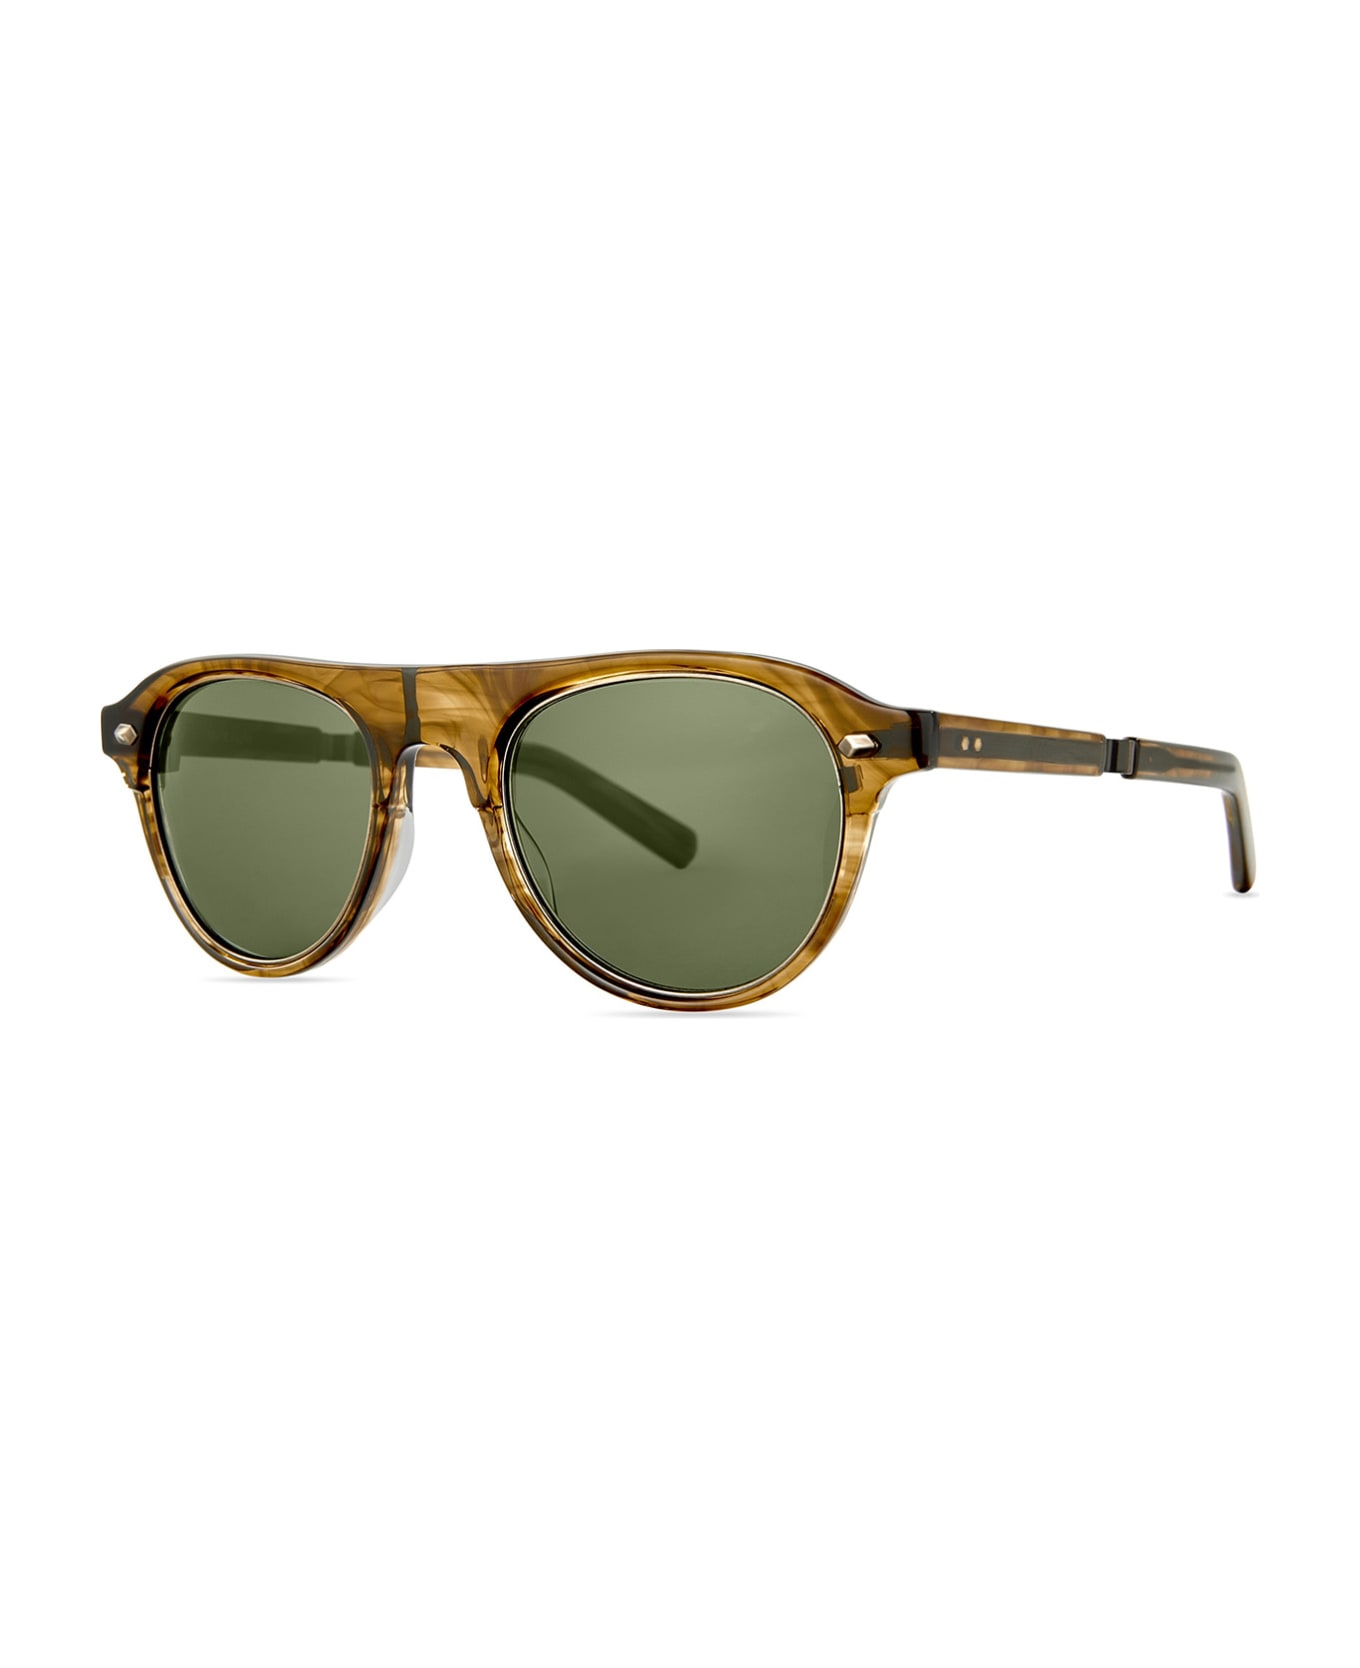 Mr. Leight Stahl S Marbled Rye-antique Gold/green Sunglasses - Marbled Rye-Antique Gold/Green サングラス